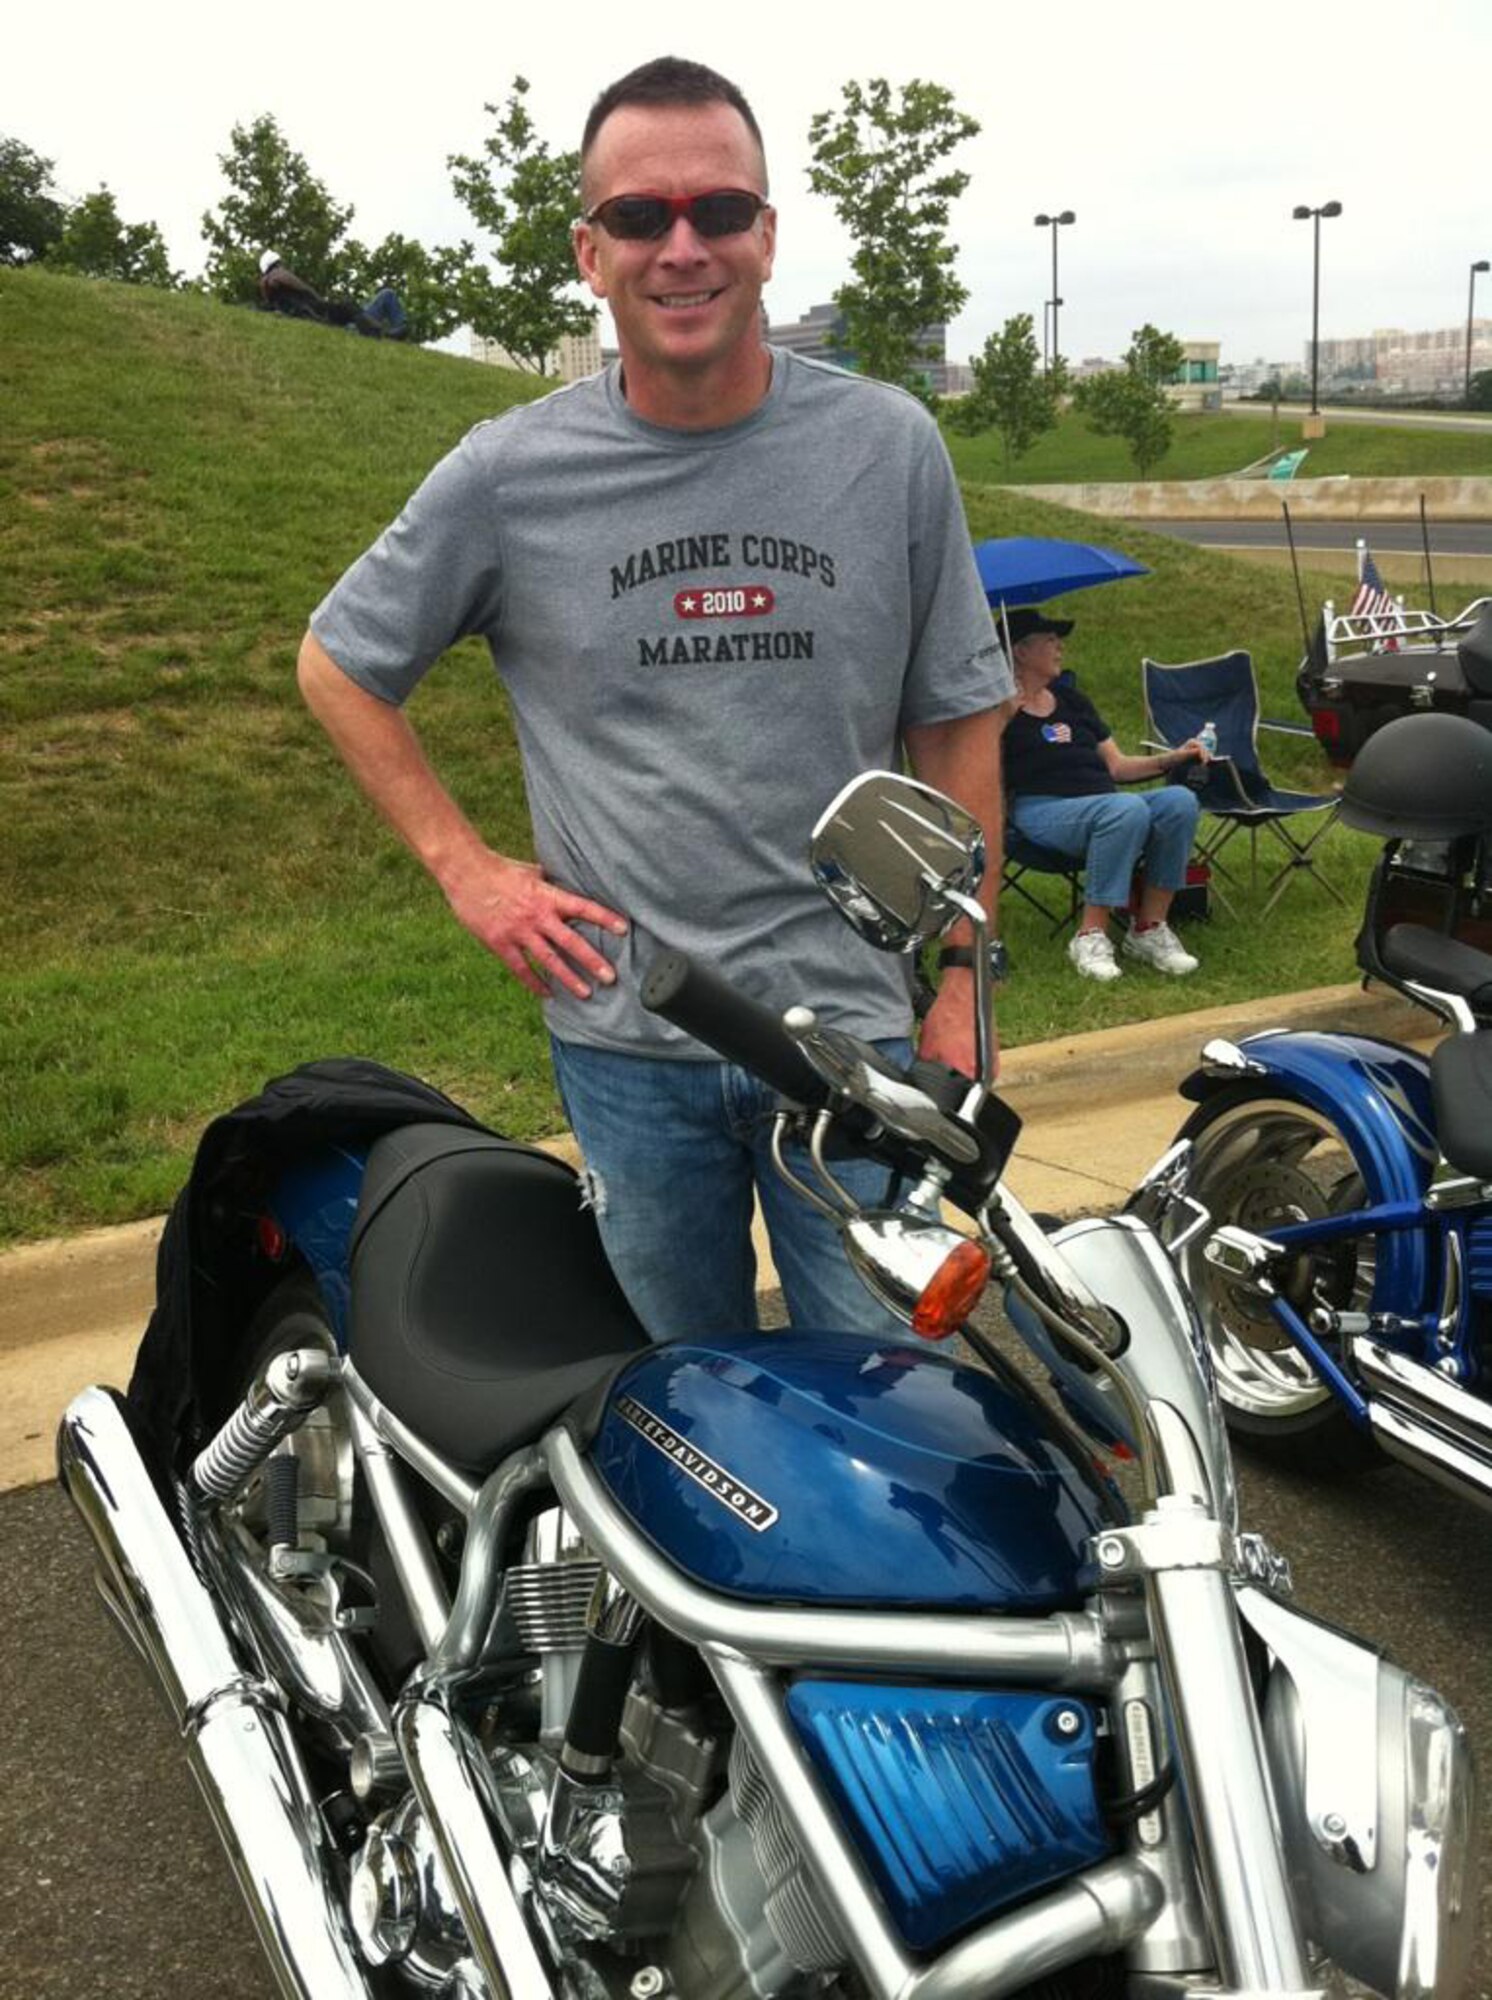 Col. Bruce Roehm, new 341st Medical Group commander, poses with his Harley Davidson motorcycle before participating in the Rolling Thunder event in Washington D.C.  (Courtesy photo)